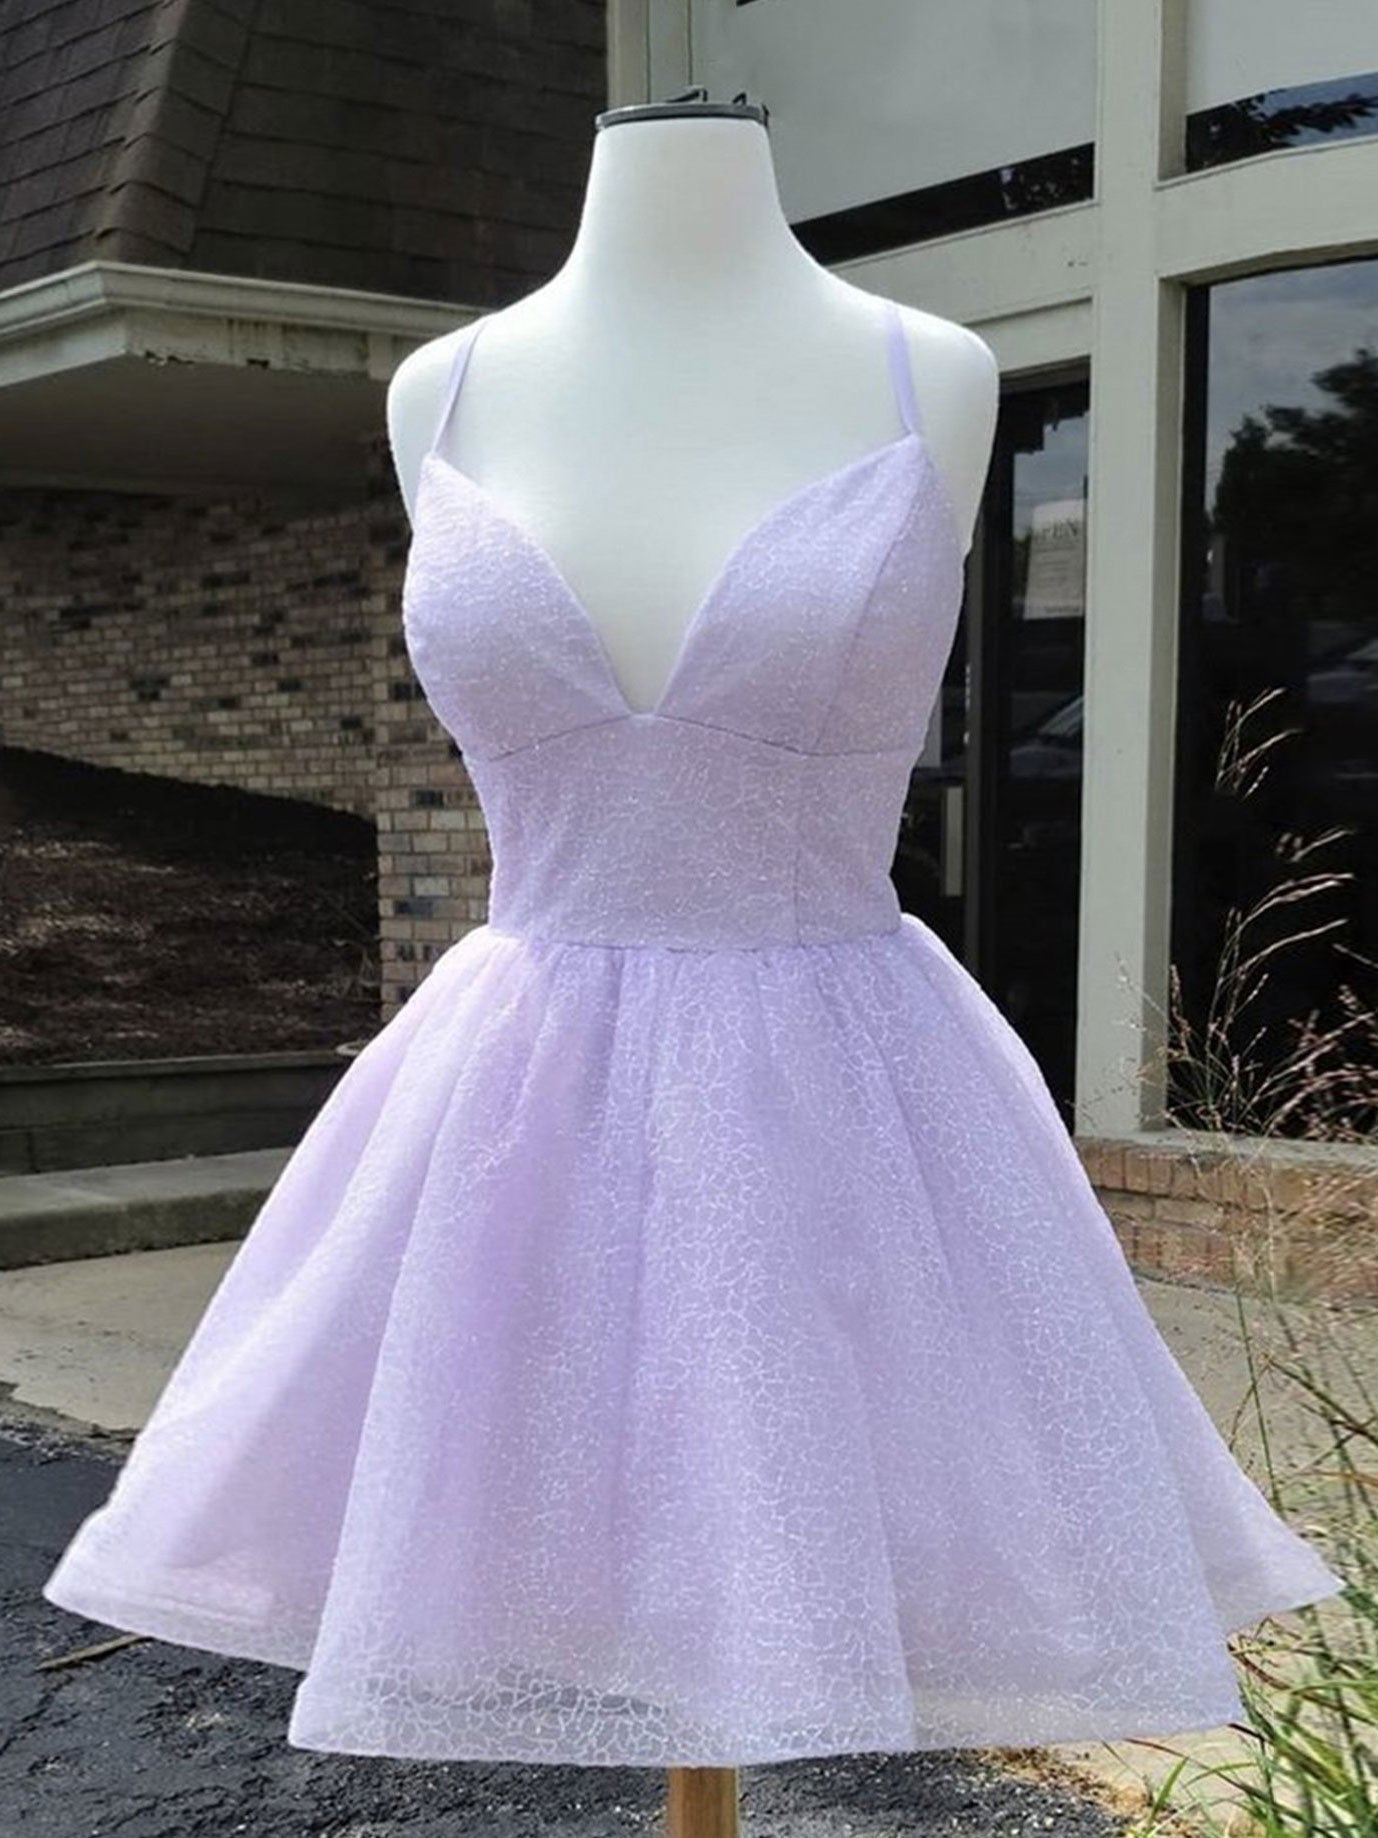 Simple Purple V Neck Tulle Short Corset Prom Dresses, Purple Corset Homecoming Dresses outfit, Small Wedding Ideas